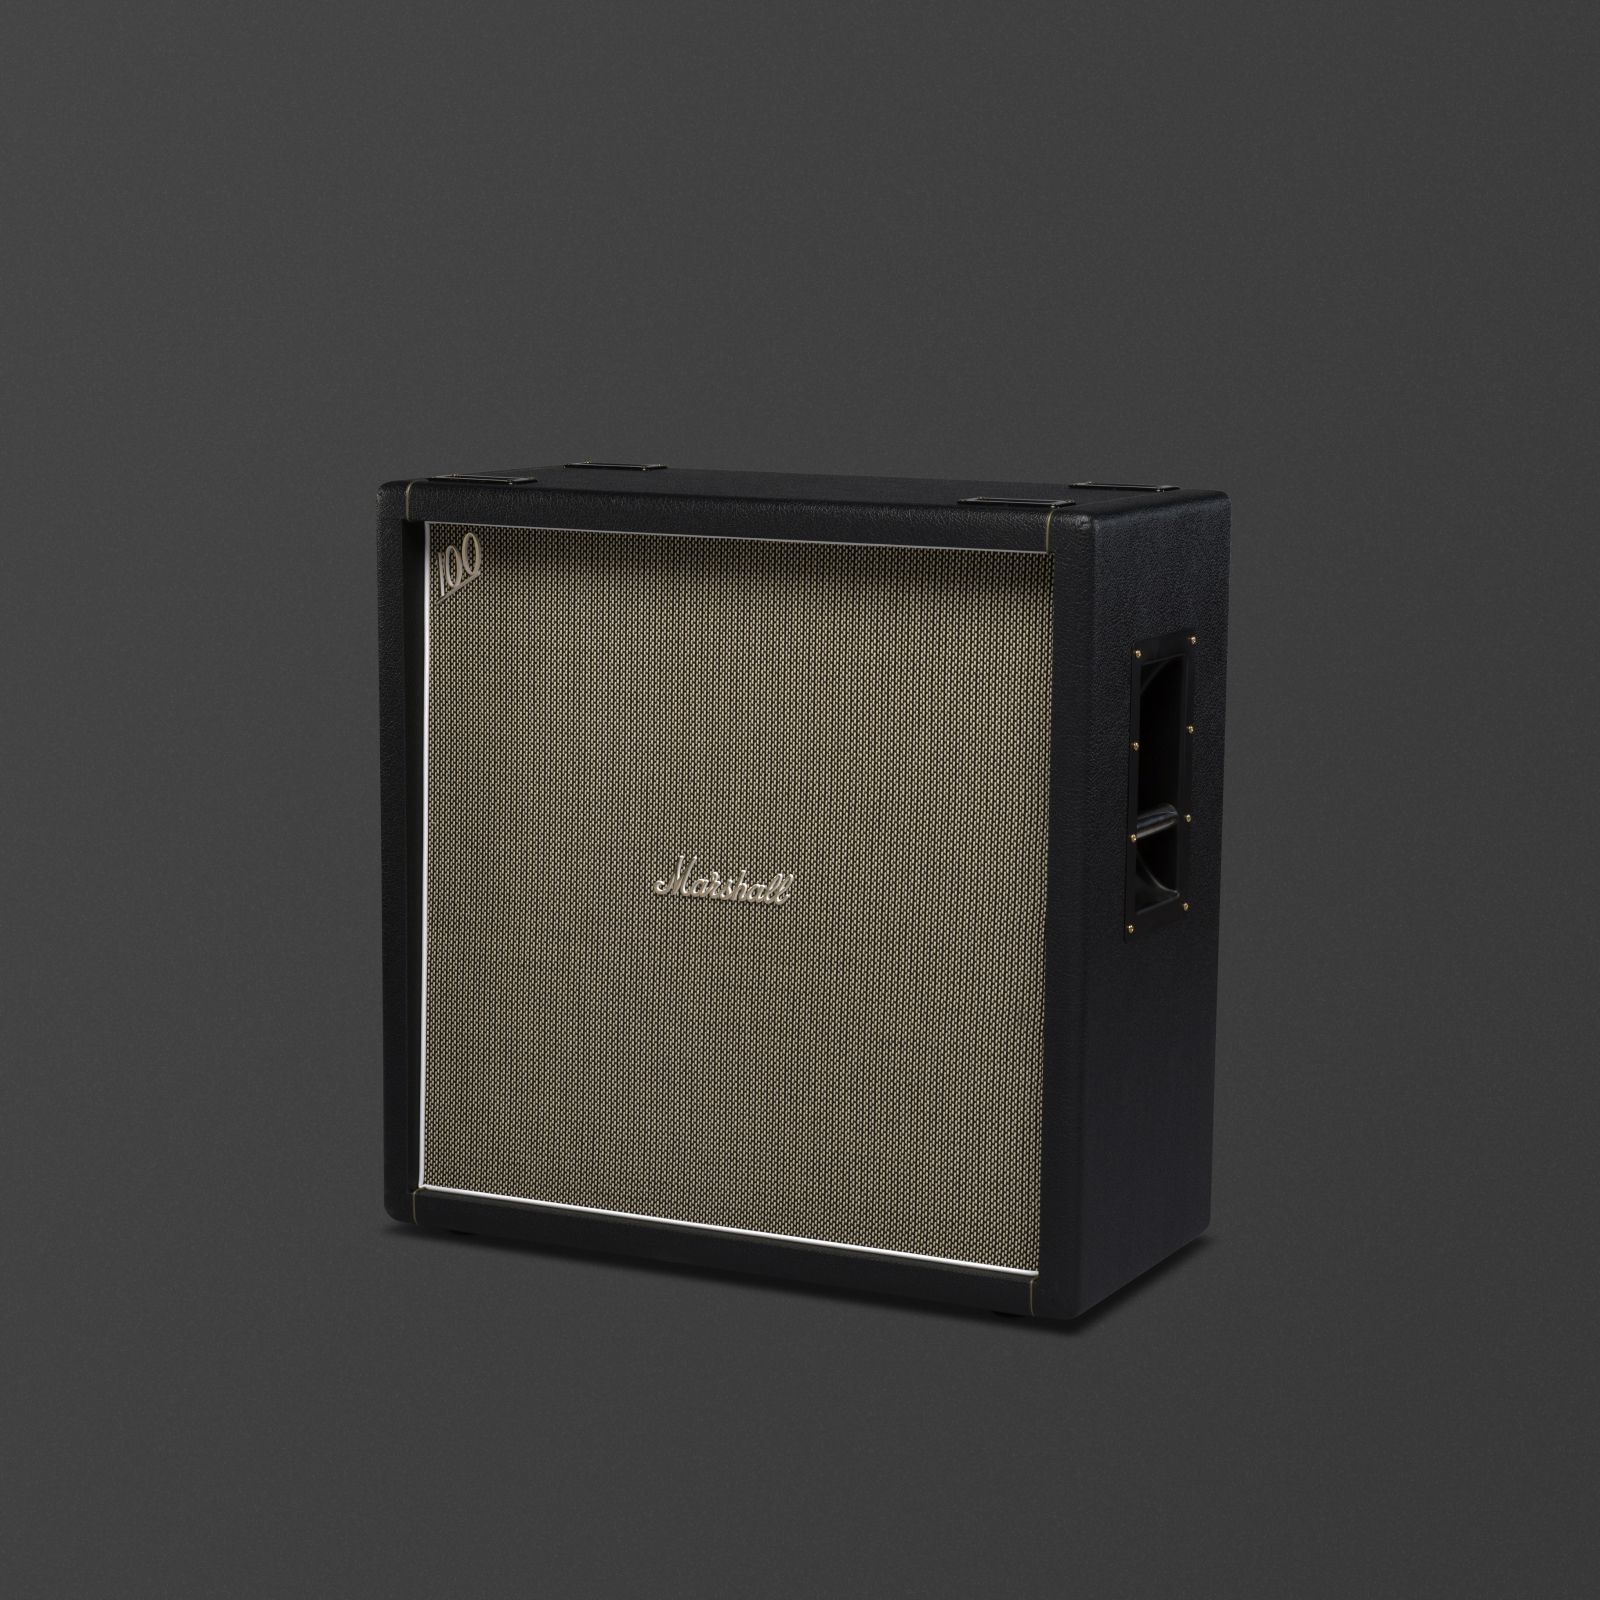 Marshall's 1960BHW cabinet in a vintage look.  